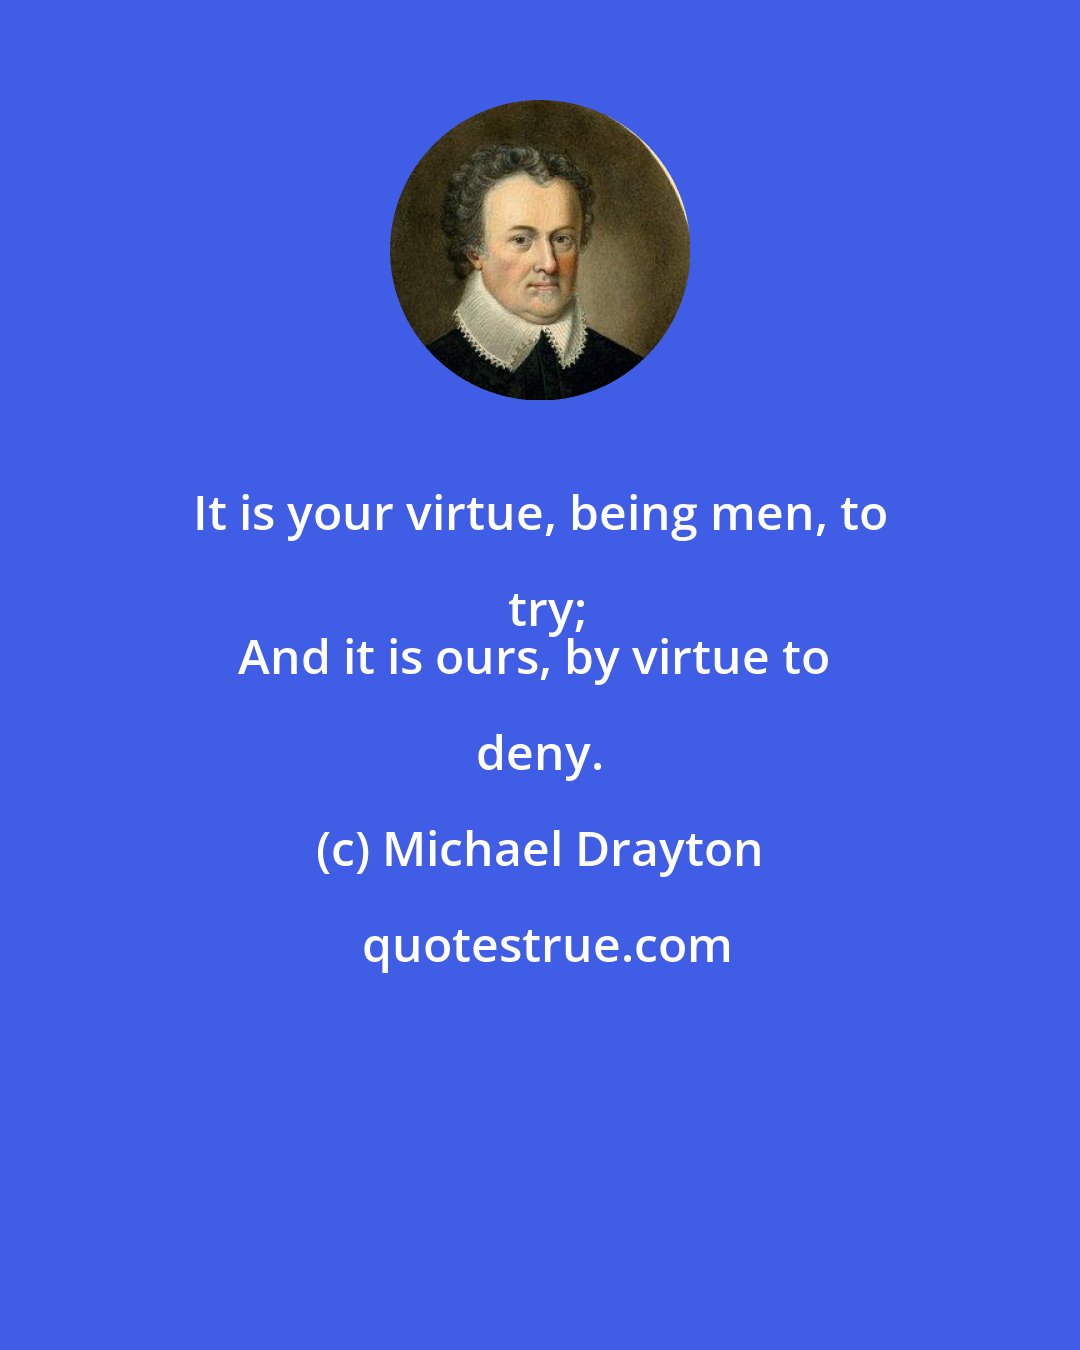 Michael Drayton: It is your virtue, being men, to try;
And it is ours, by virtue to deny.